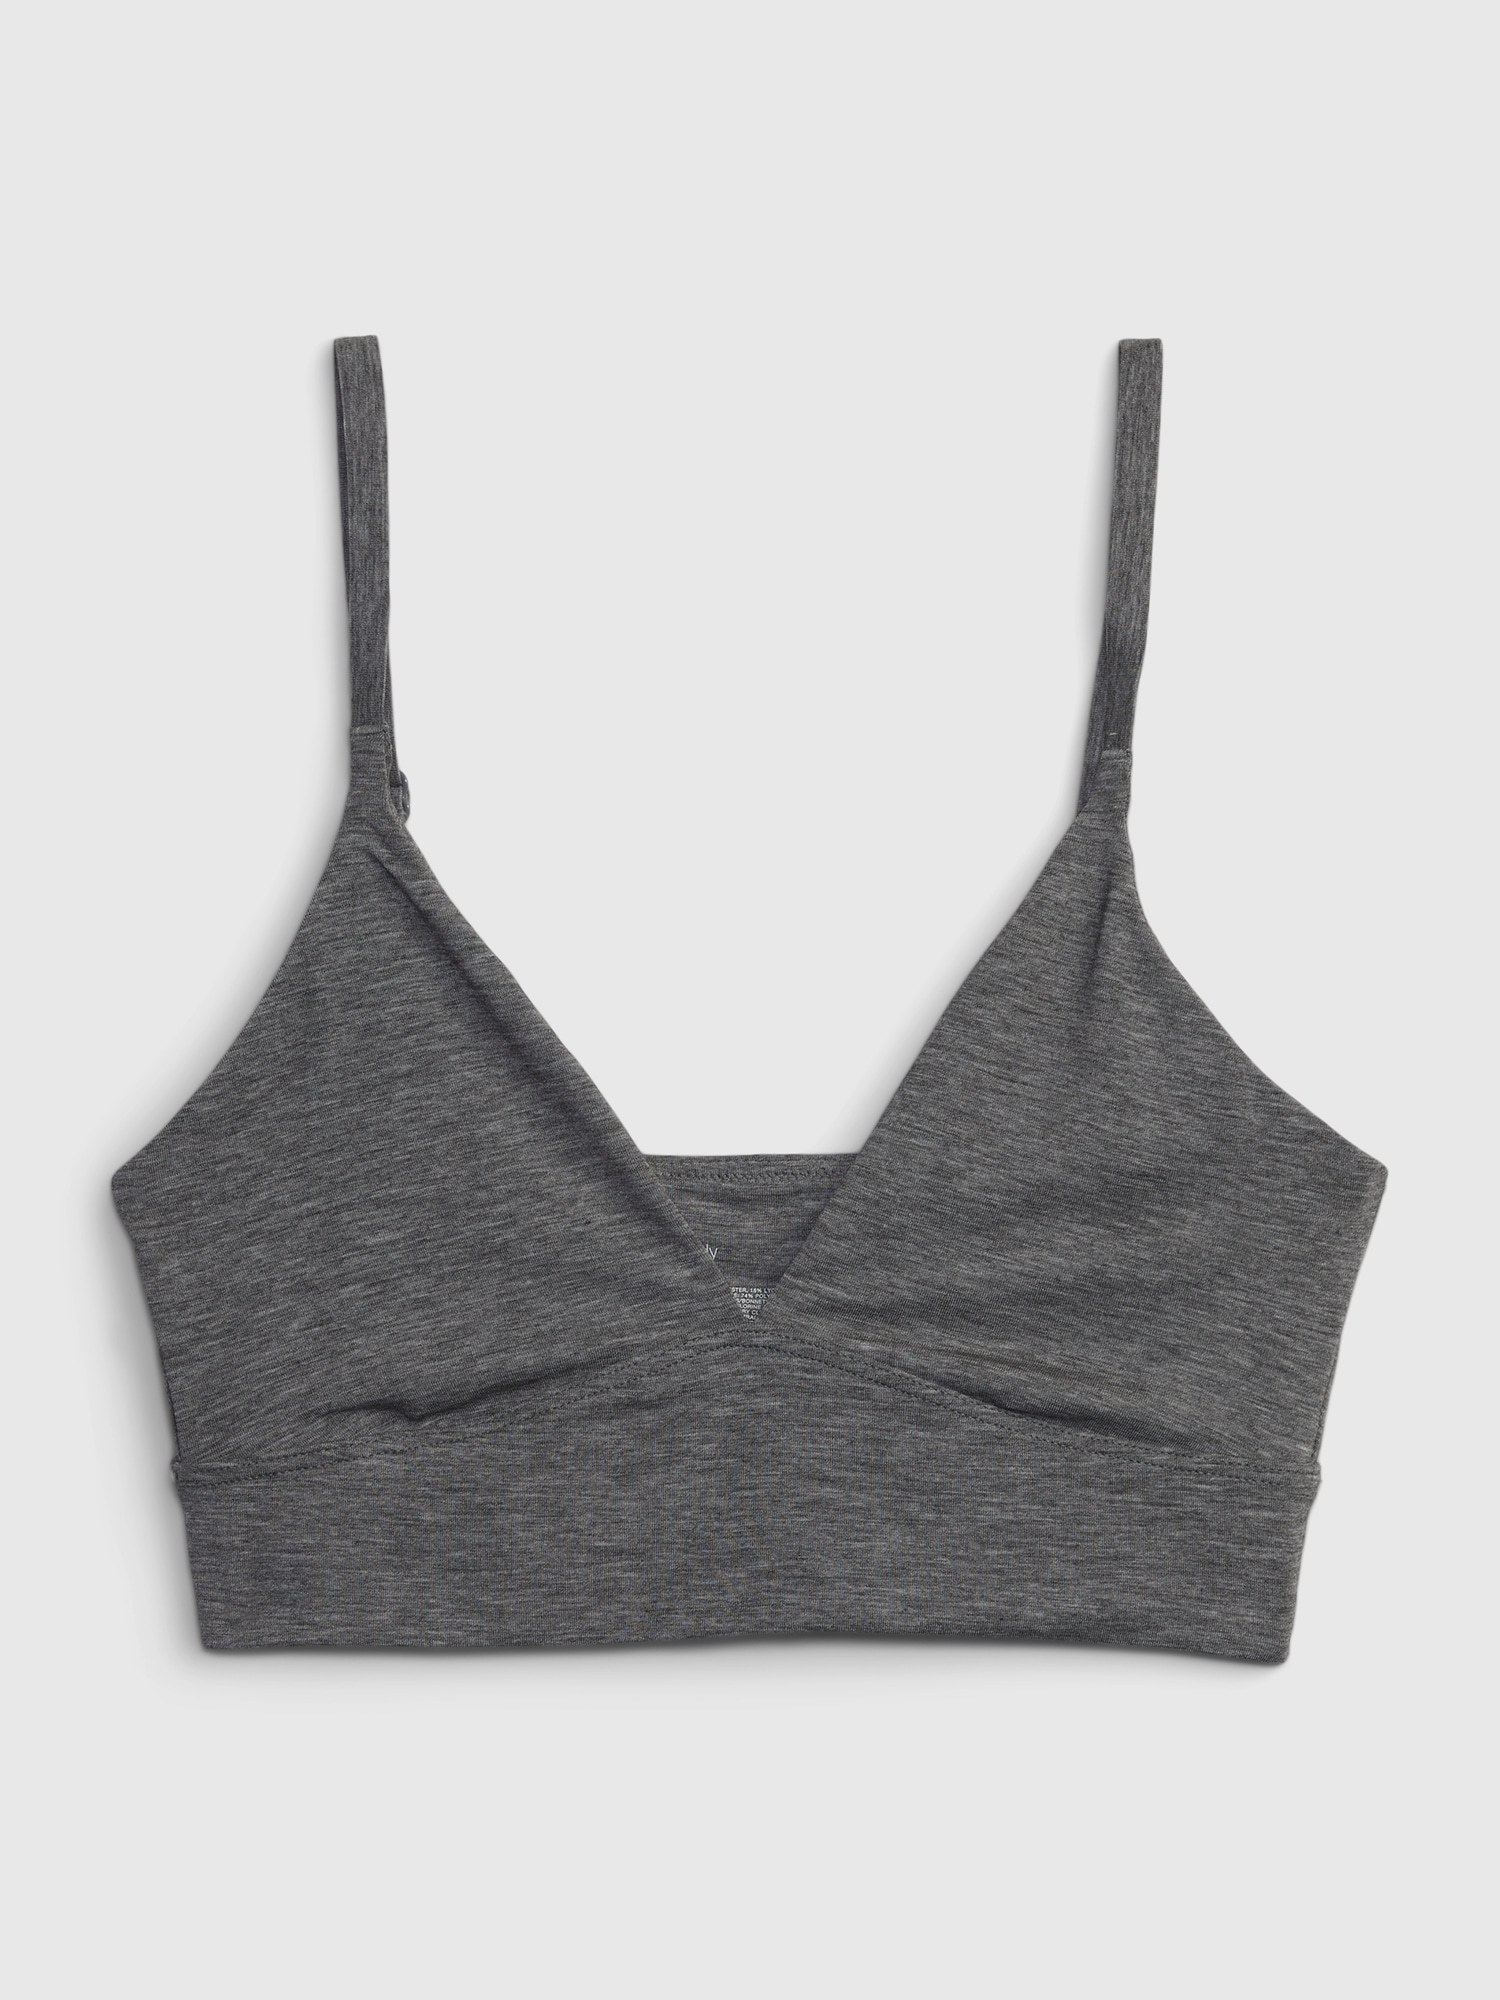 Gap Breathe Wireless Bra  After 15 Years, I'm Still Buying This